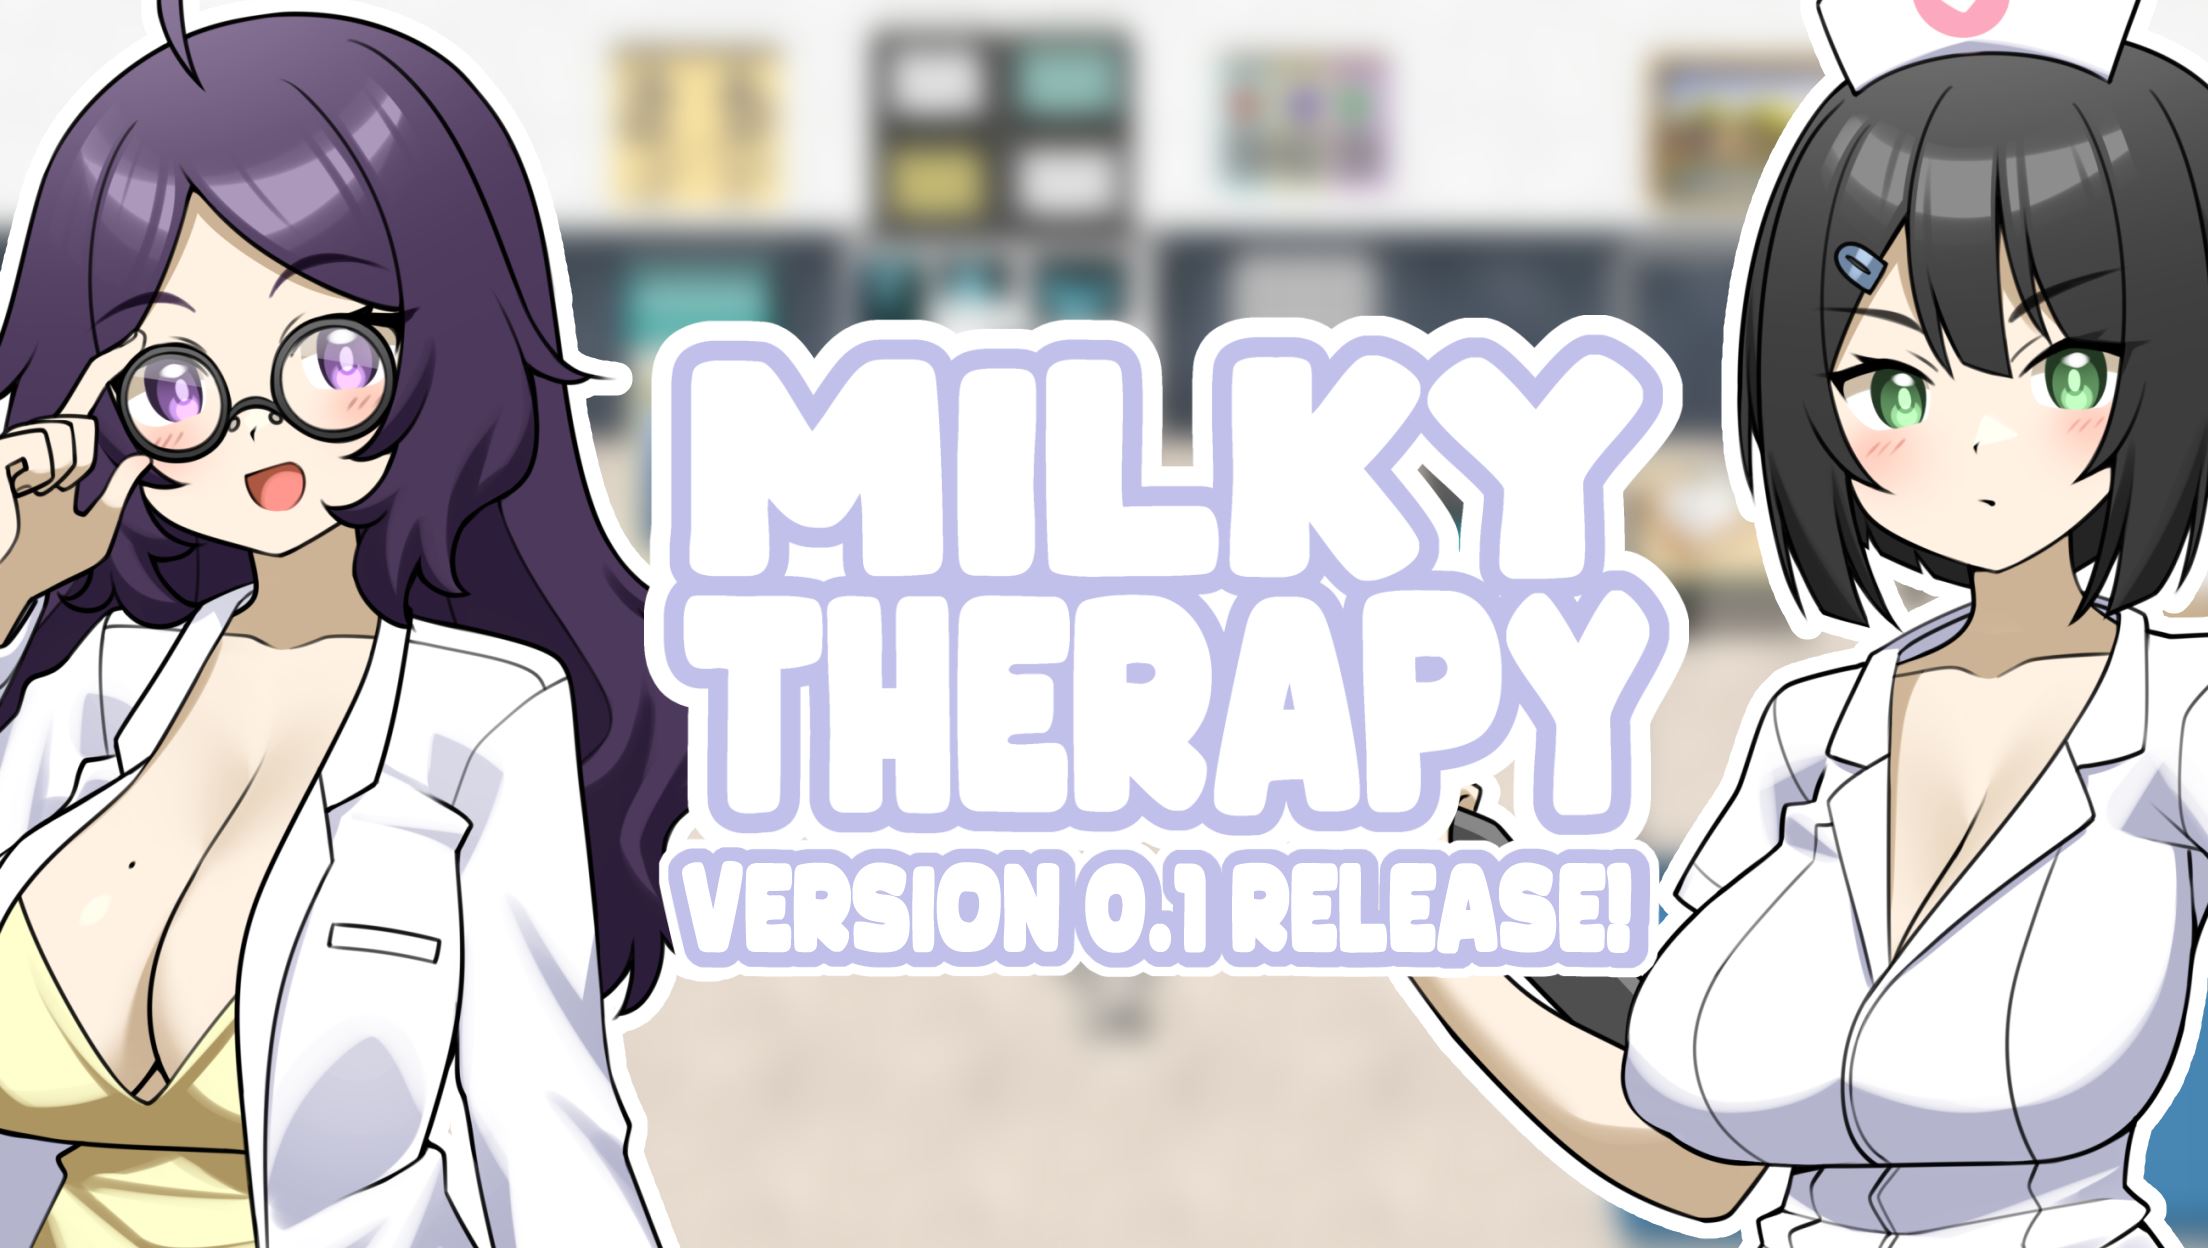 Milky Therapy porn xxx game download cover